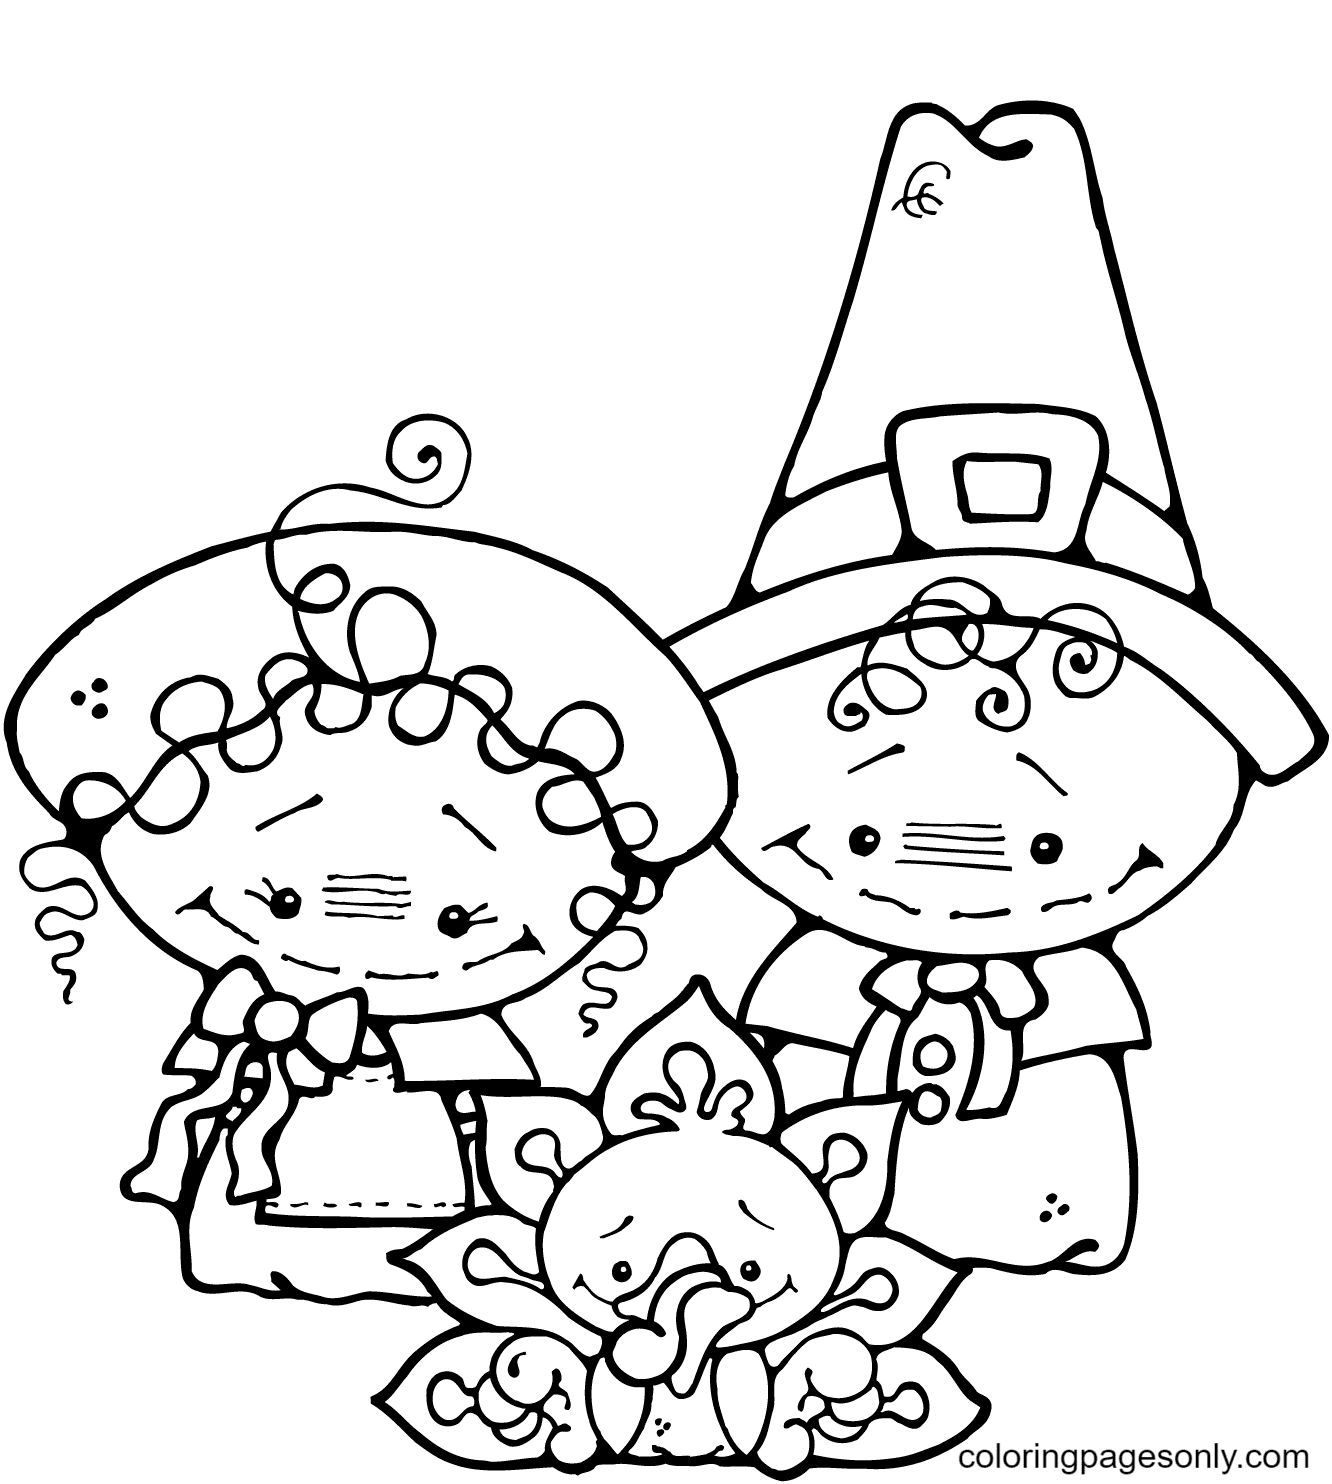 Pilgrim Boy and Girl with Turkey Coloring Pages   Thanksgiving ...